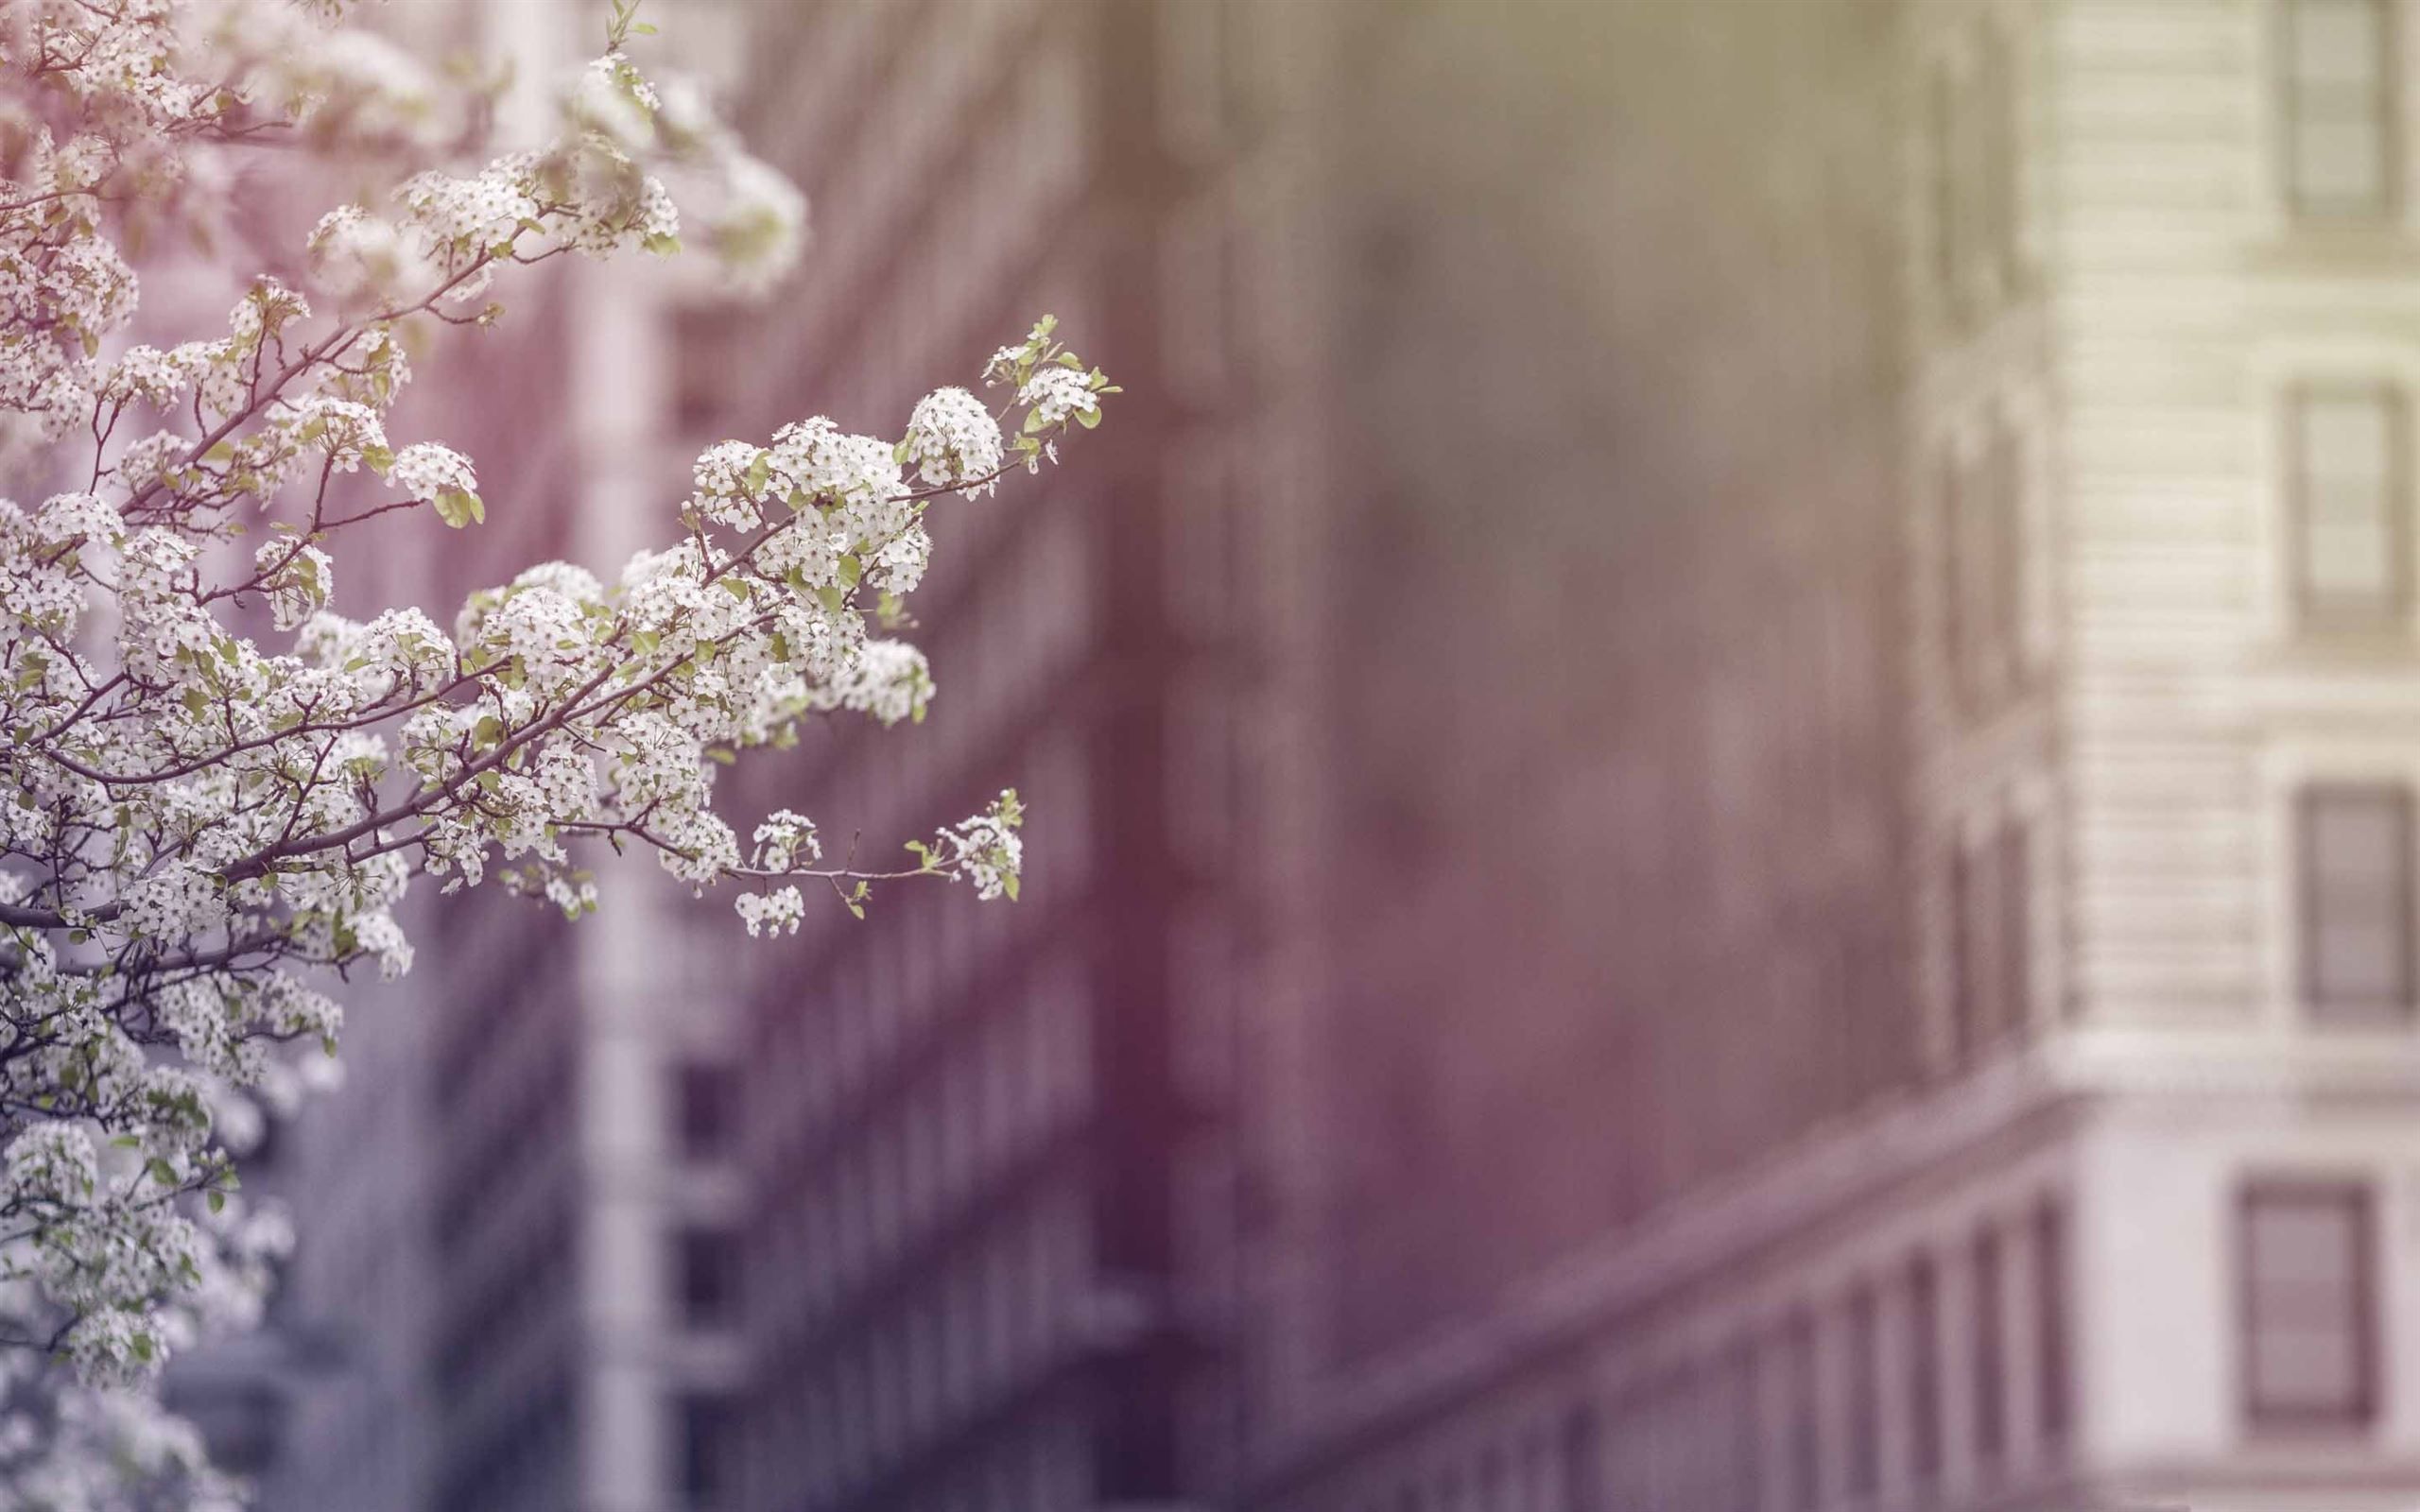 A tree with white flowers in front of tall buildings - Spring